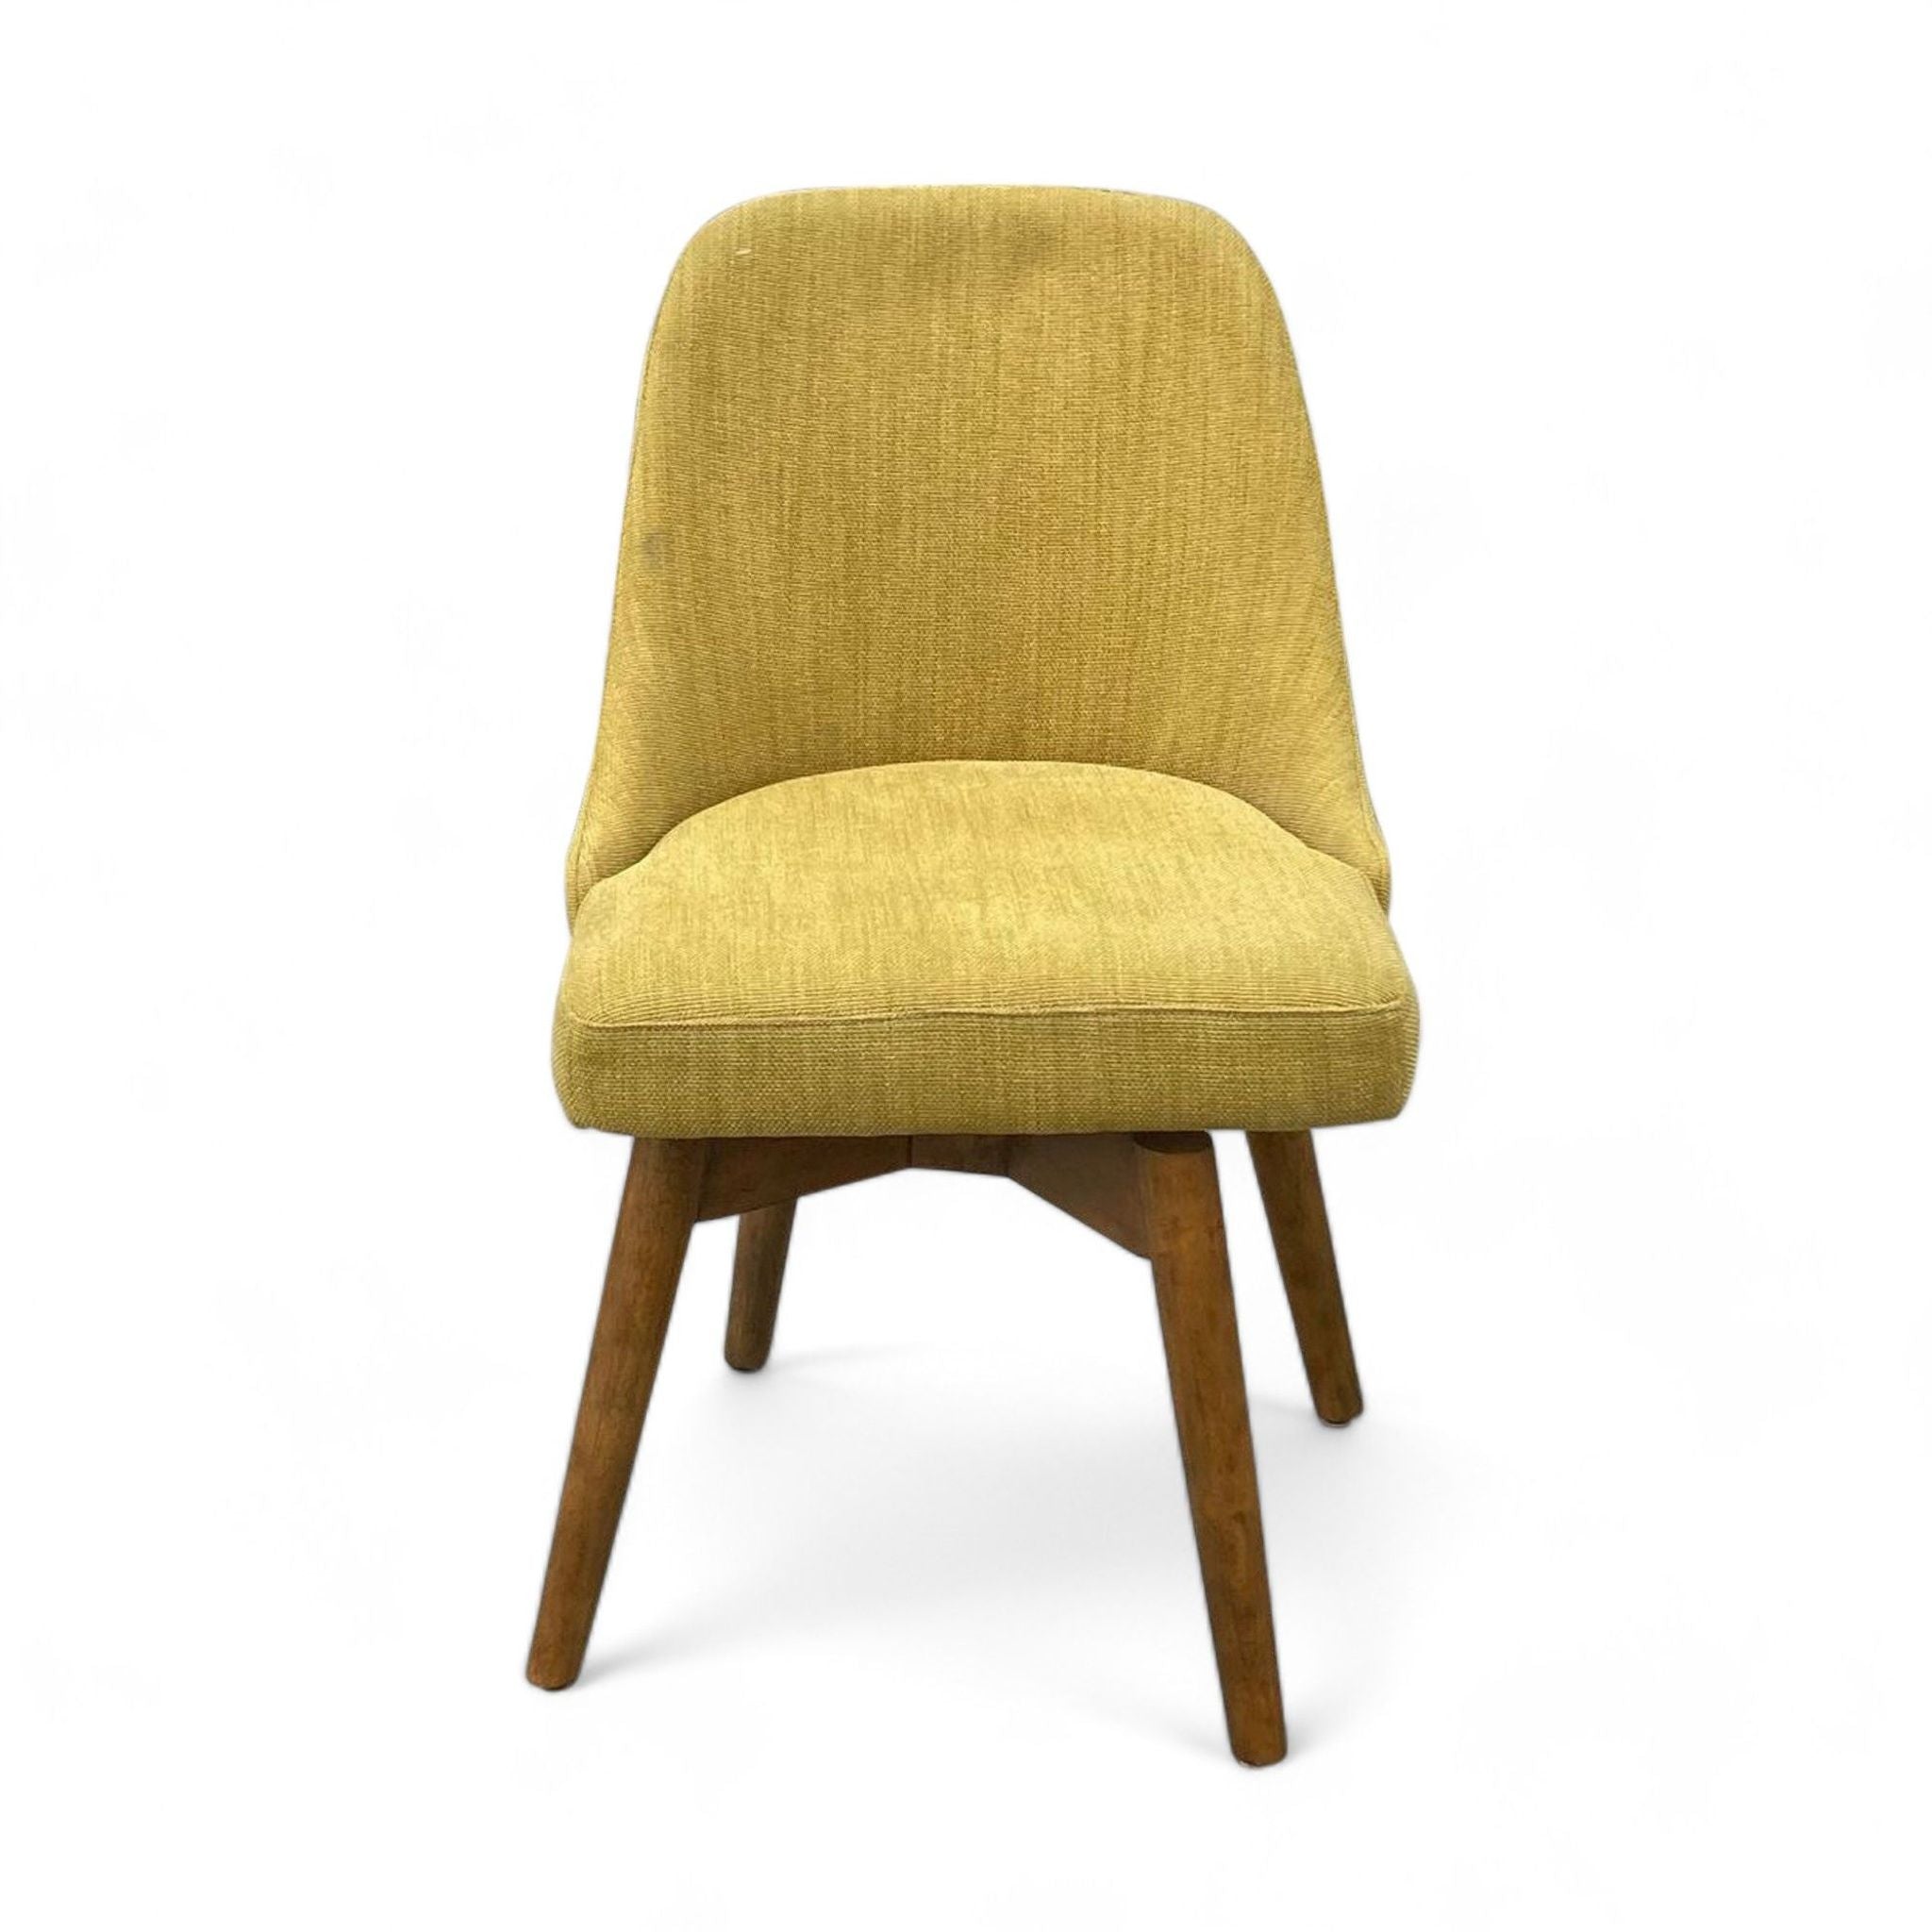 West Elm dining chair with a wide cushioned seat, sloping back, and wood swivel base against a white background.